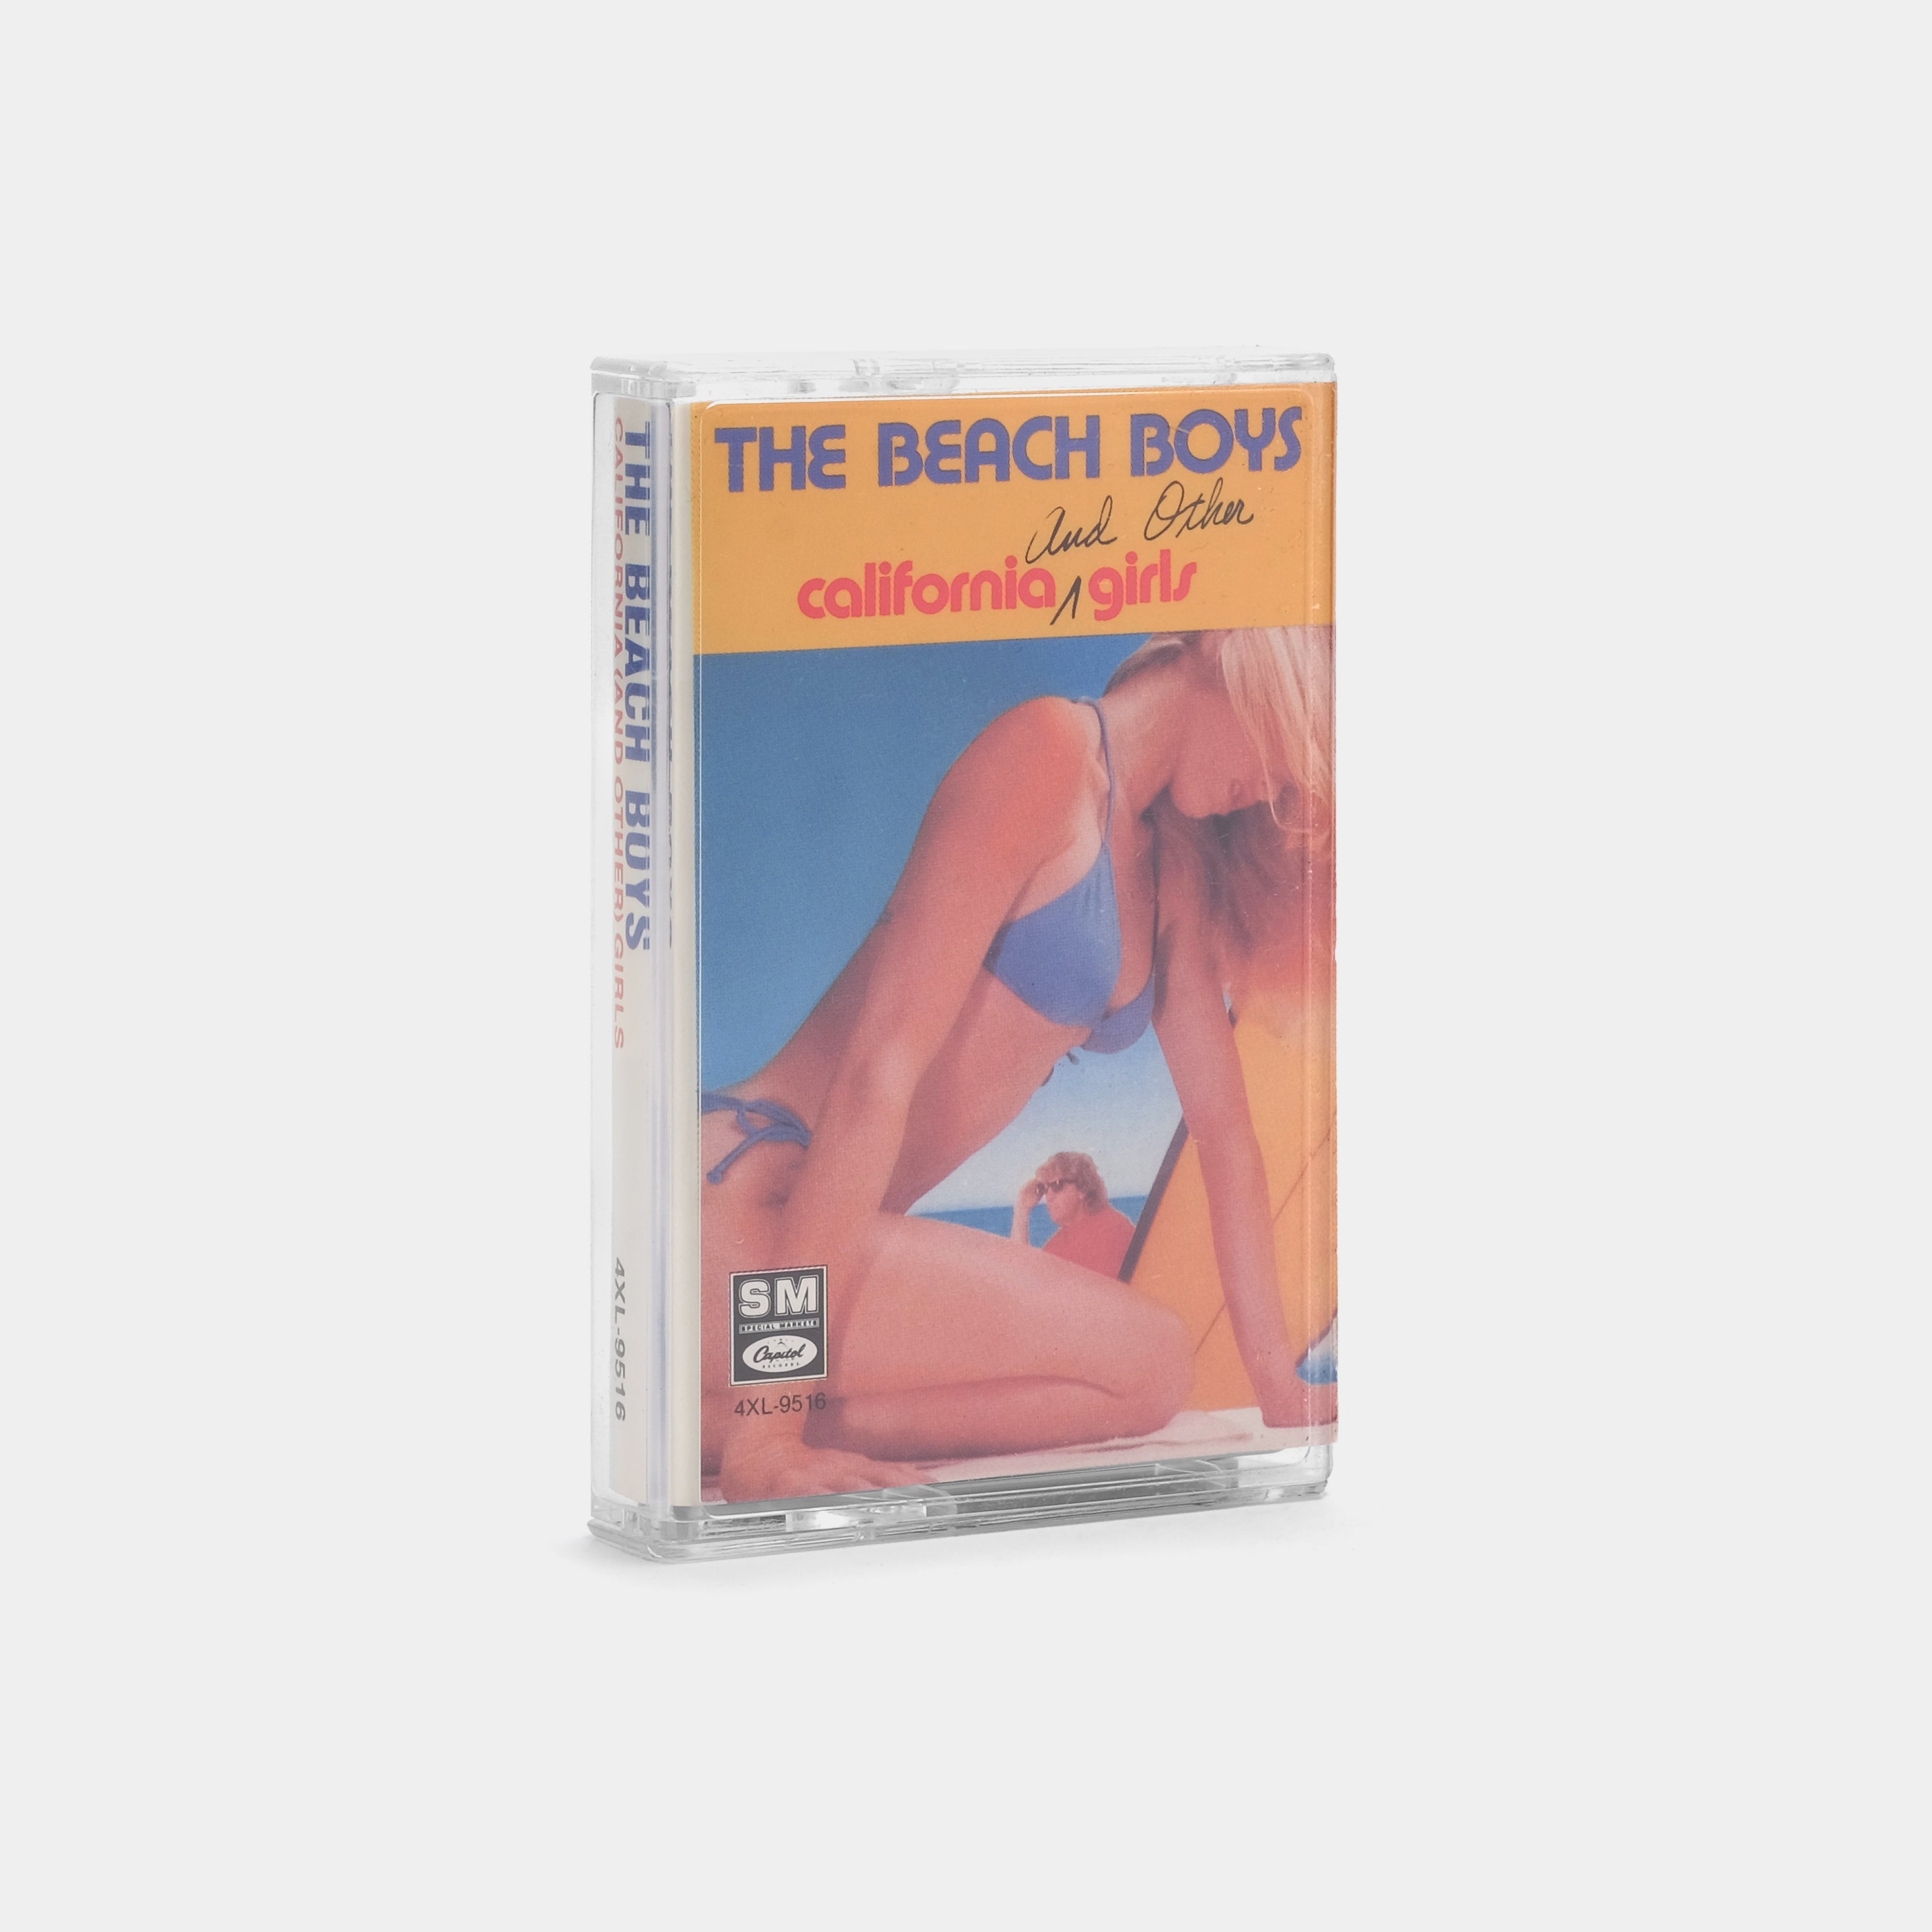 The Beach Boys - California (And Other) Girls Cassette Tape